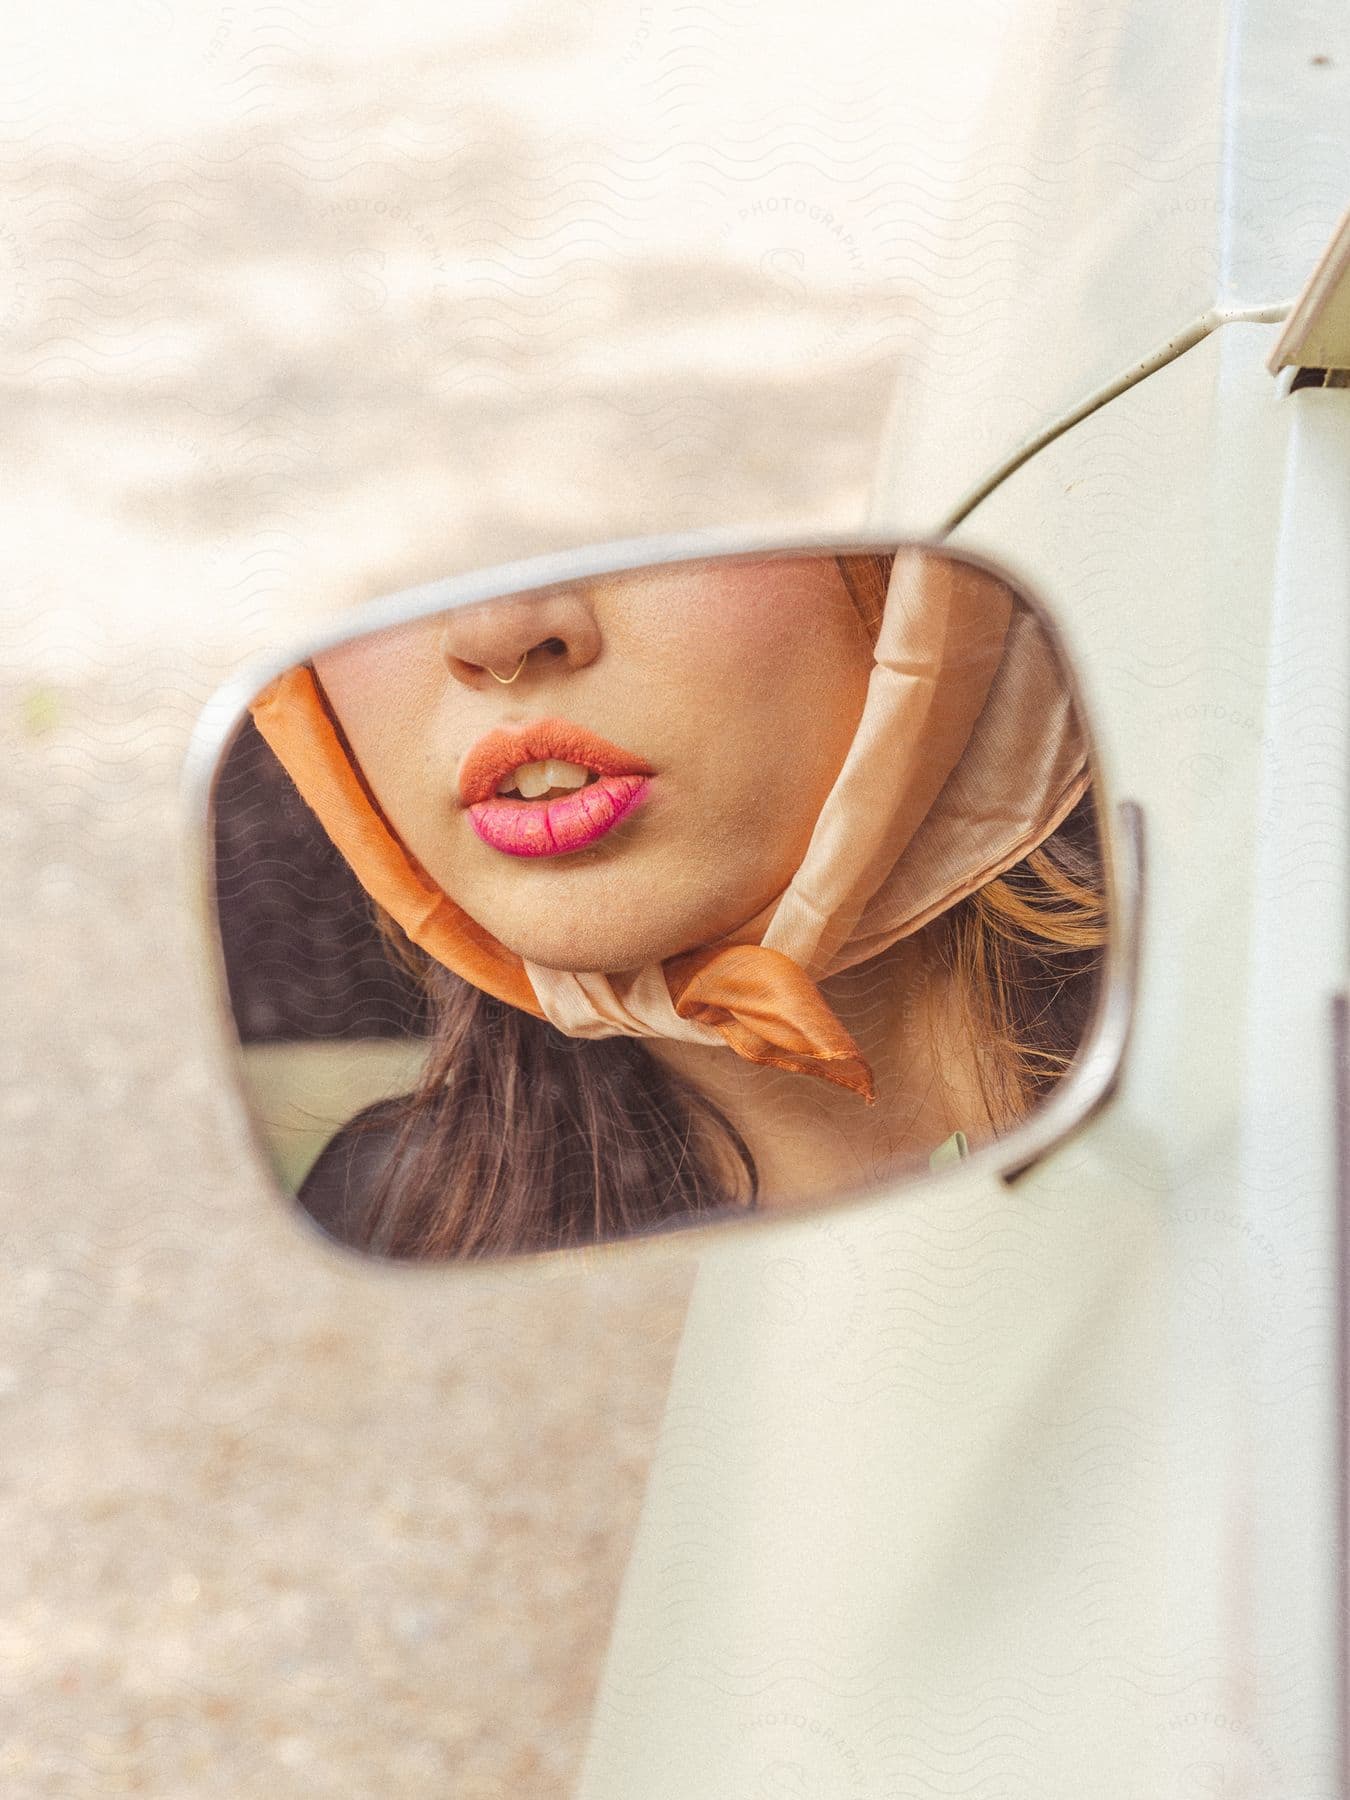 A woman's face reflected in a car mirror with her lips open and her nose pierced and a cloth on her chin